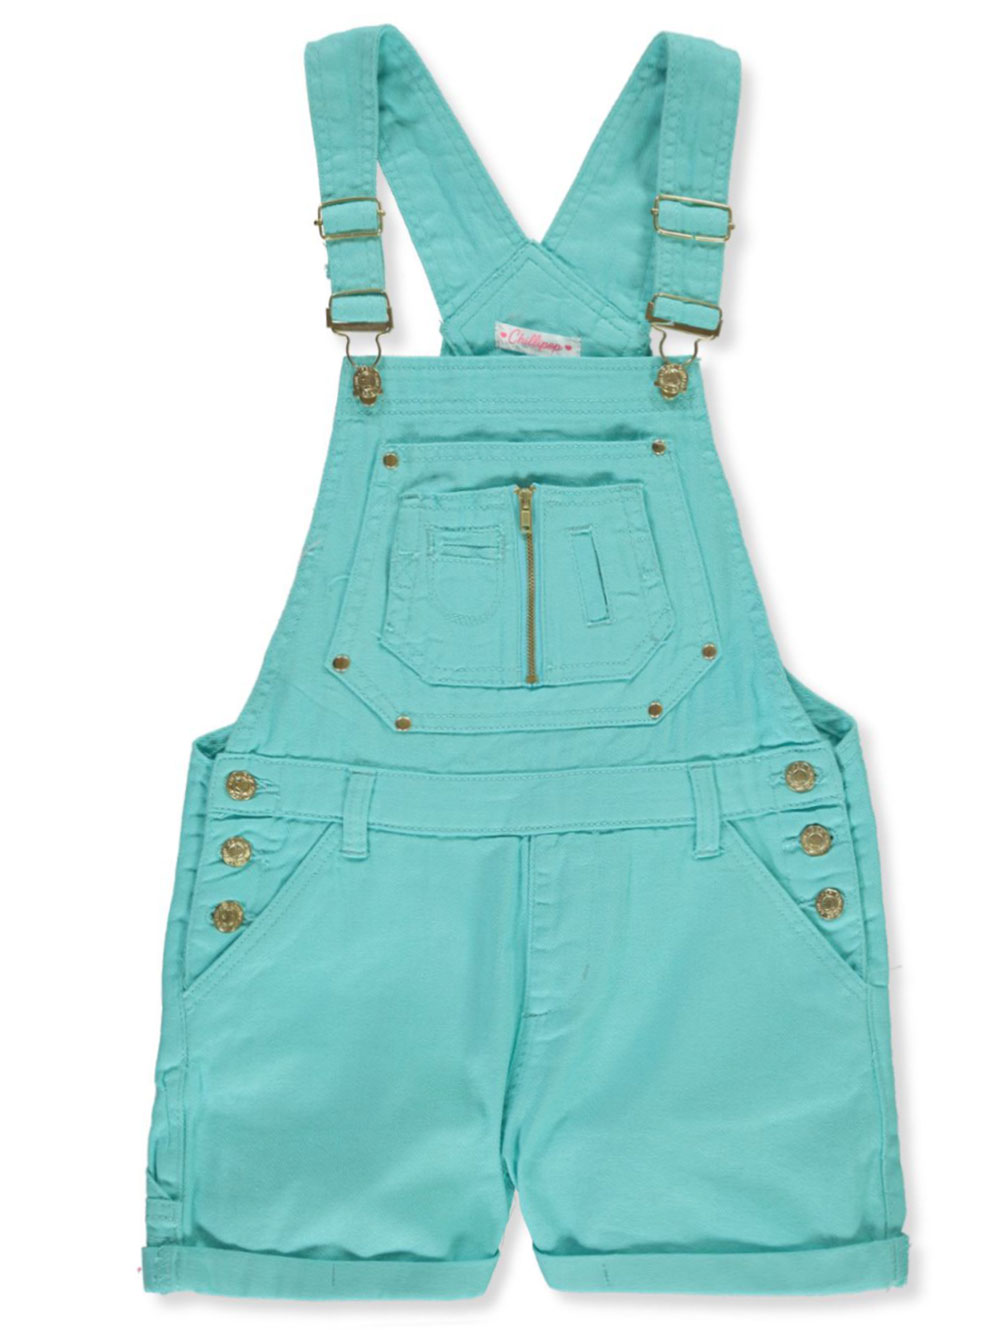 Size 6 Overalls Jumpers for Girls